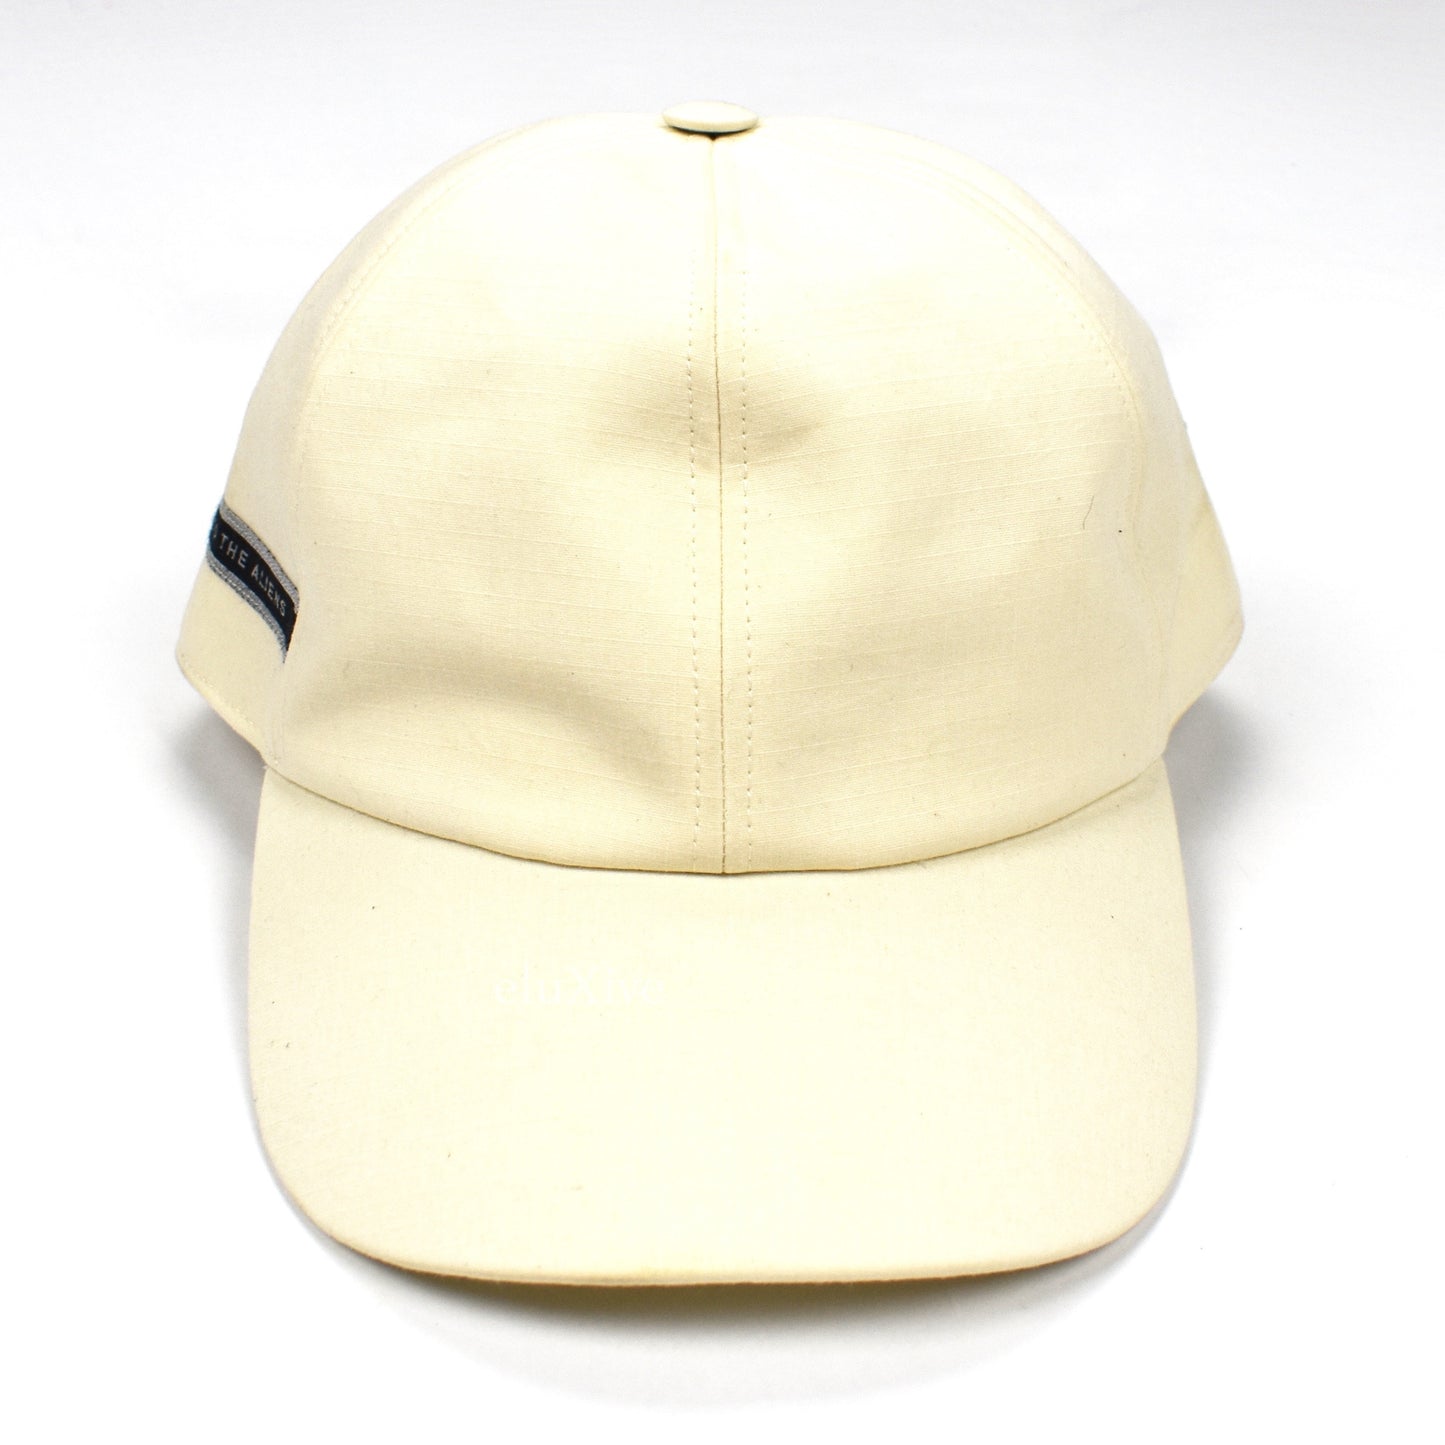 Rick Owens DRKSHDW - Praying To The Aliens Hat (Natural)